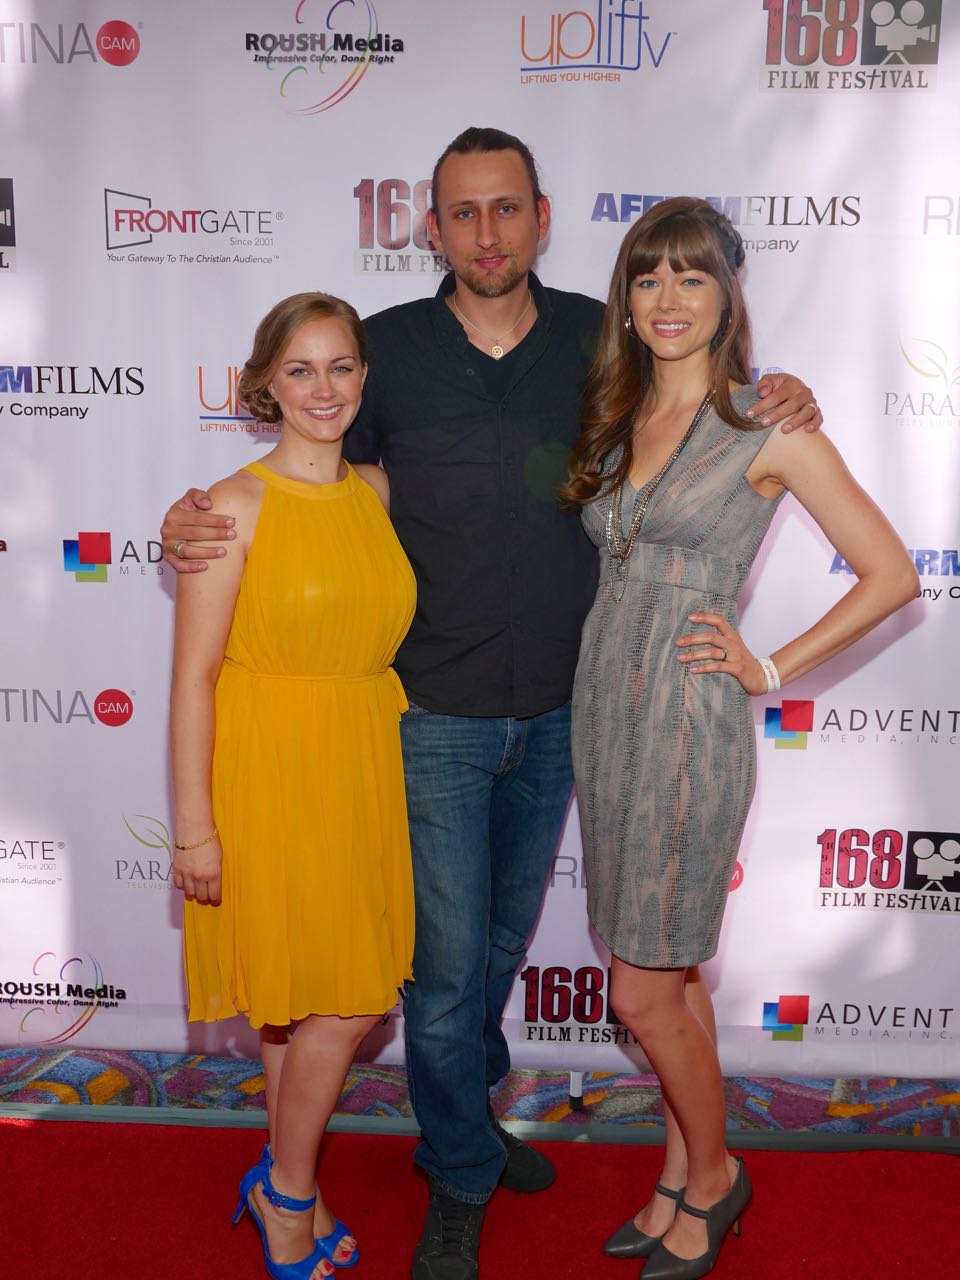 Marianne Haaland, Lukas Colombo and Colleen Trusler at the 168 Film Festival. Haaland, Colombo and Trusler were all nominated for awards at the festival.